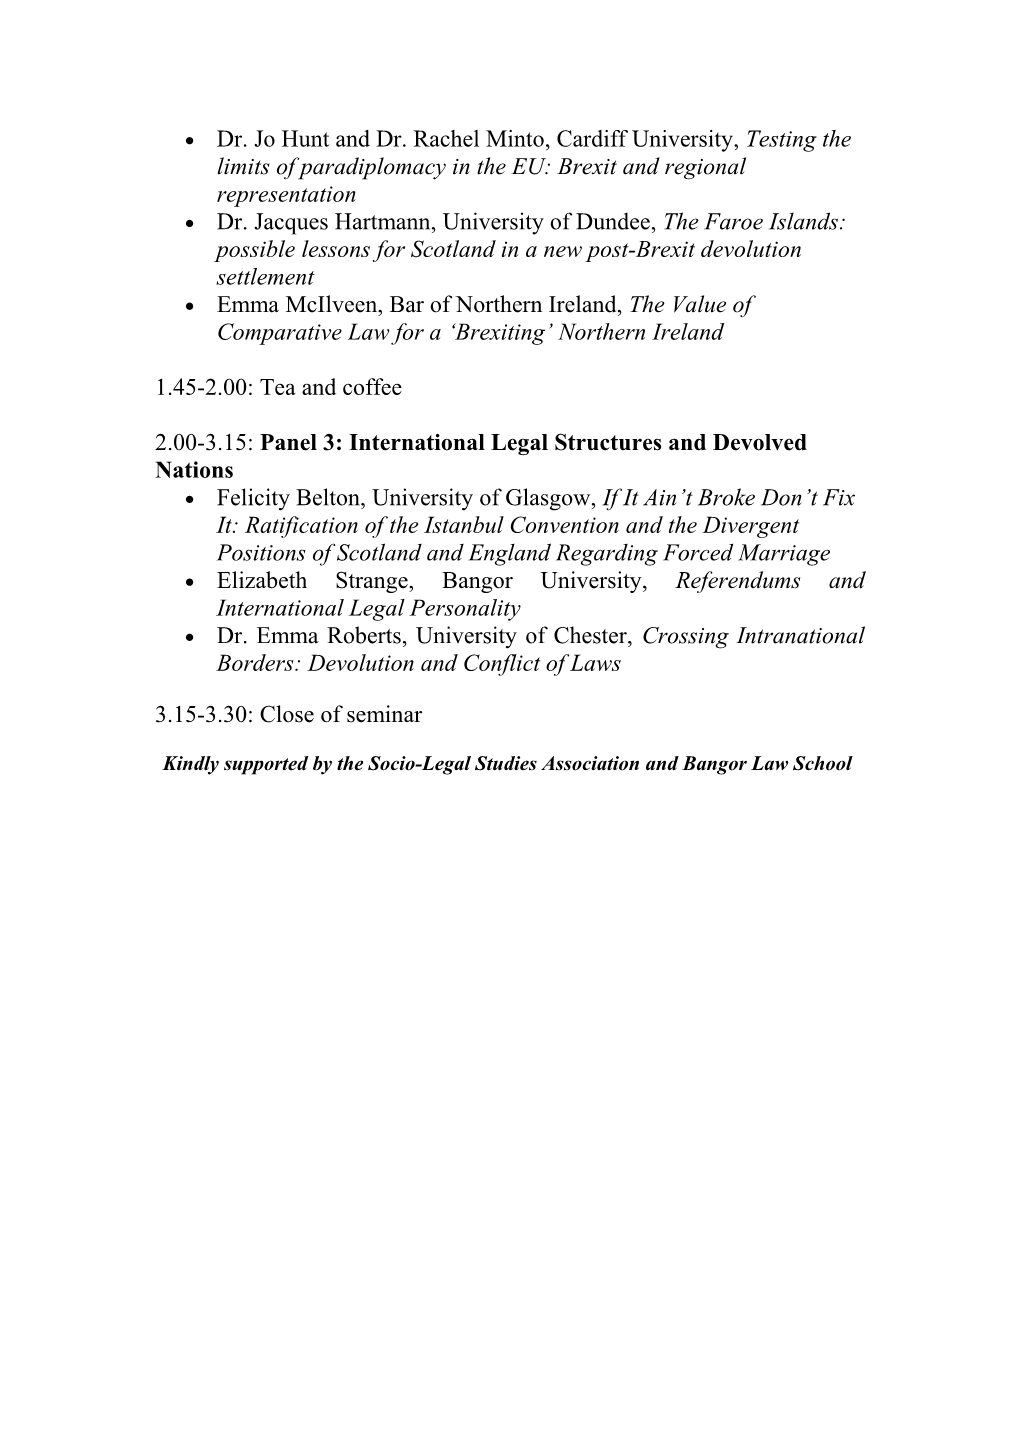 Devolved Nations and International Law